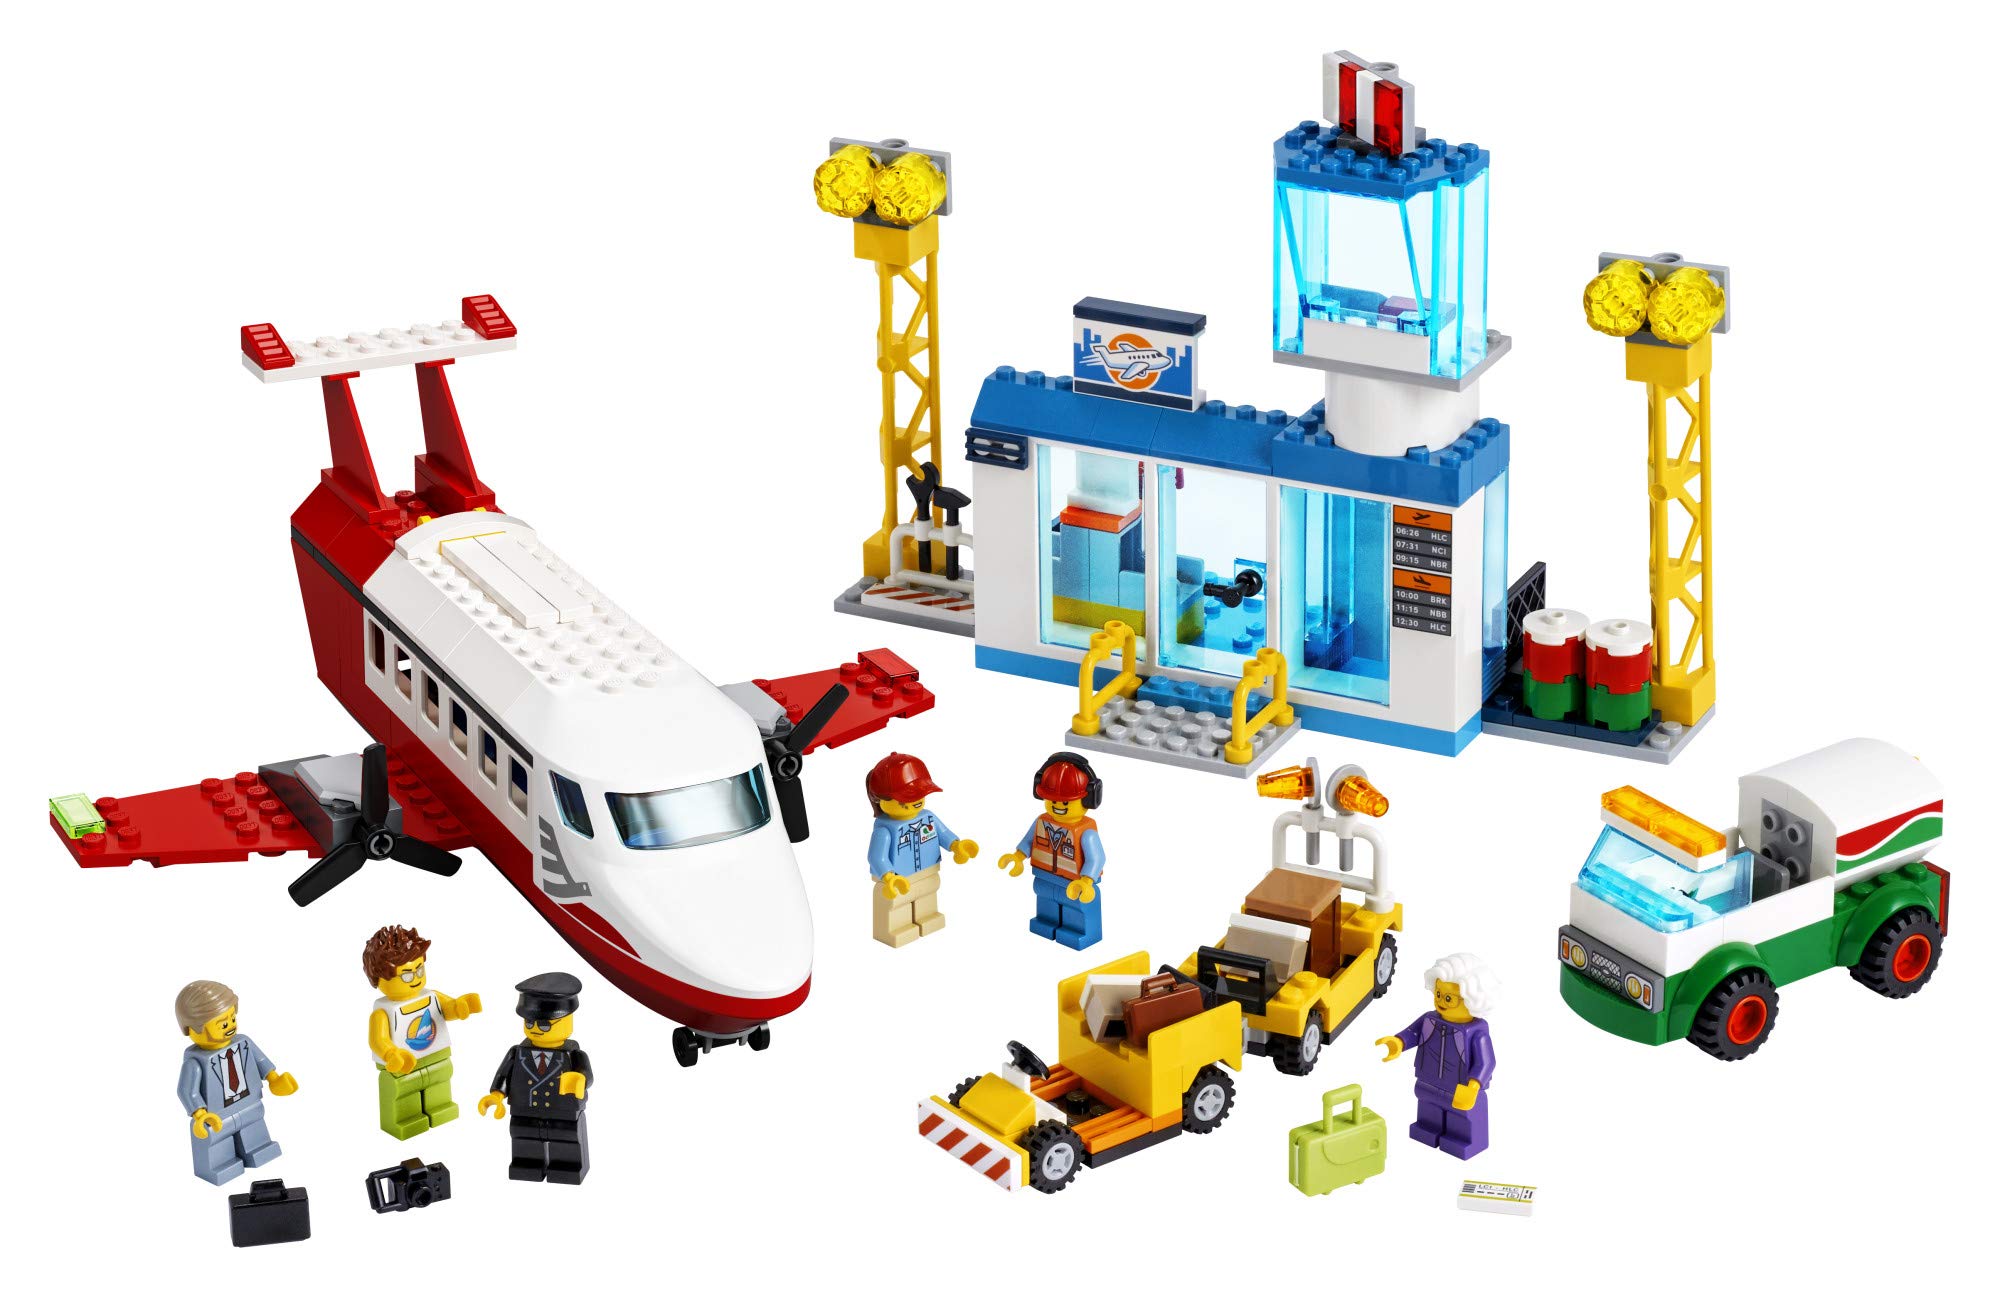 LEGO City Central Airport 60261 Building Toy, with Passenger Charter Plane, Airport Building, Fuel Tanker, Baggage Truck, Cargo and 6 Minifigures, Great Gift for Kids (286 Pieces)